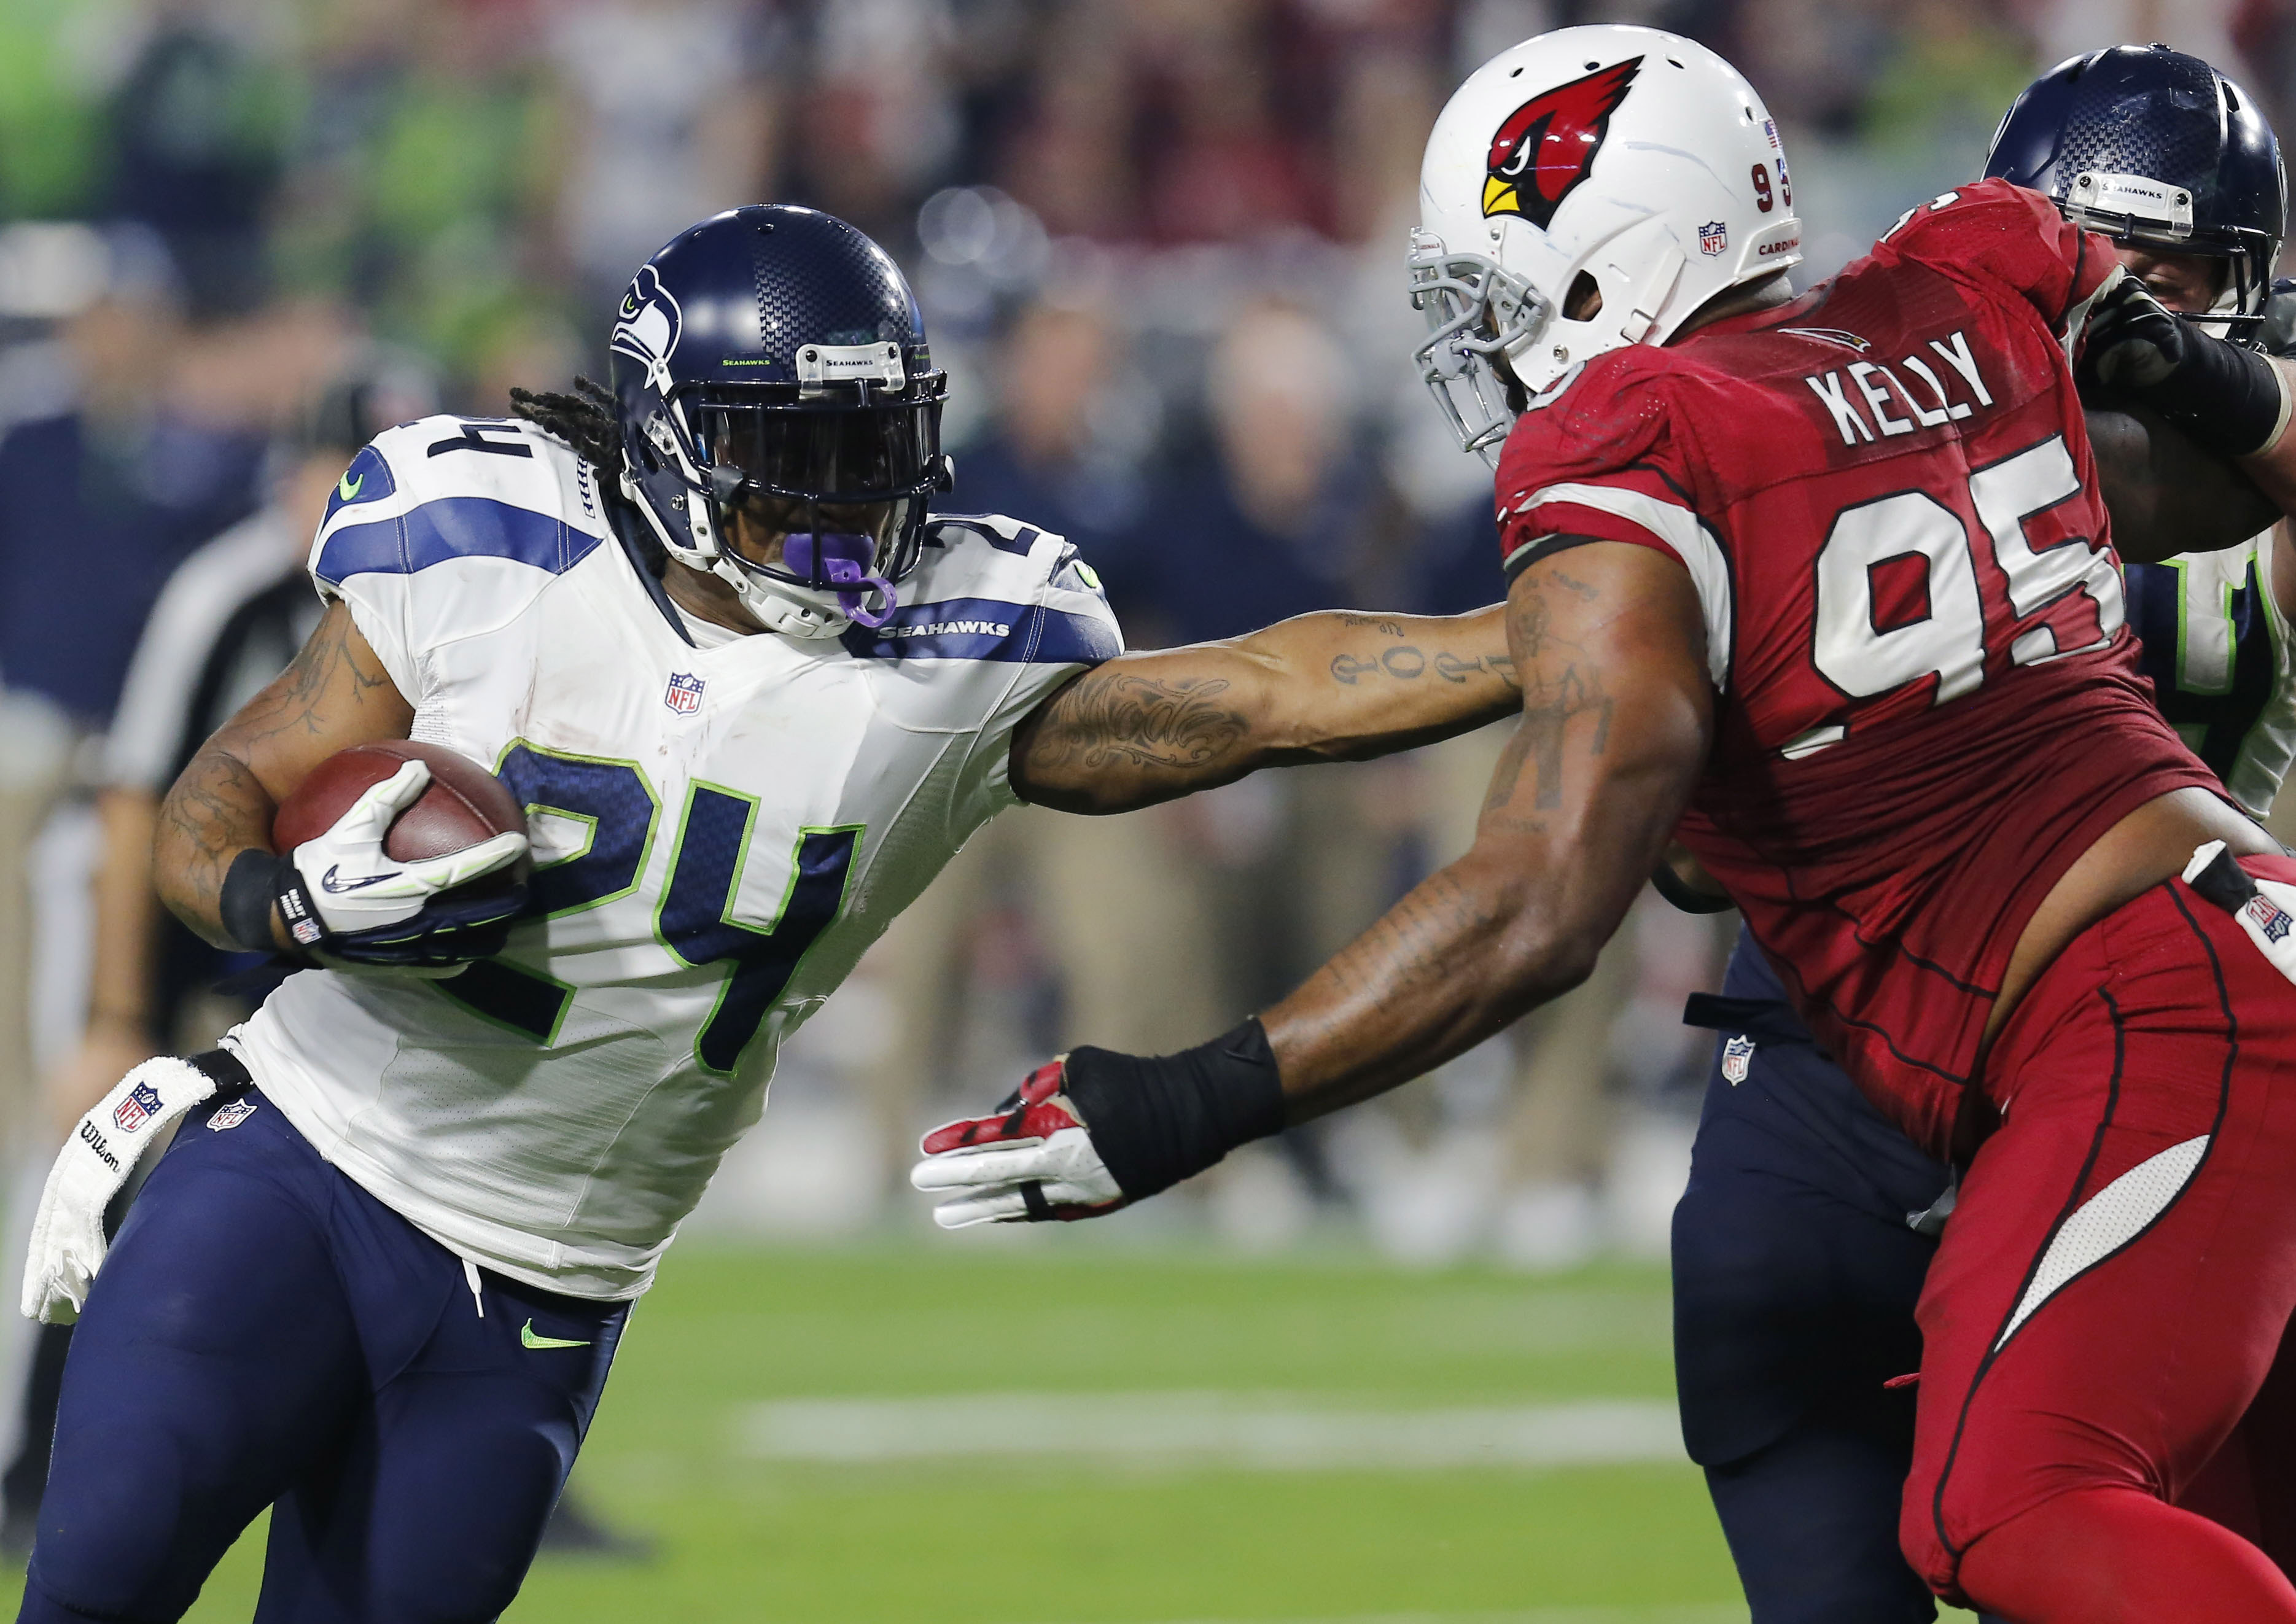 Seattle Seahawks running back Marshawn Lynch (24) fights through Arizona Cardinals defensive end Tommy Kelly (95) on his touchdown run in the first half of Seattle's 35-6 win on Sunday. The Associated Press